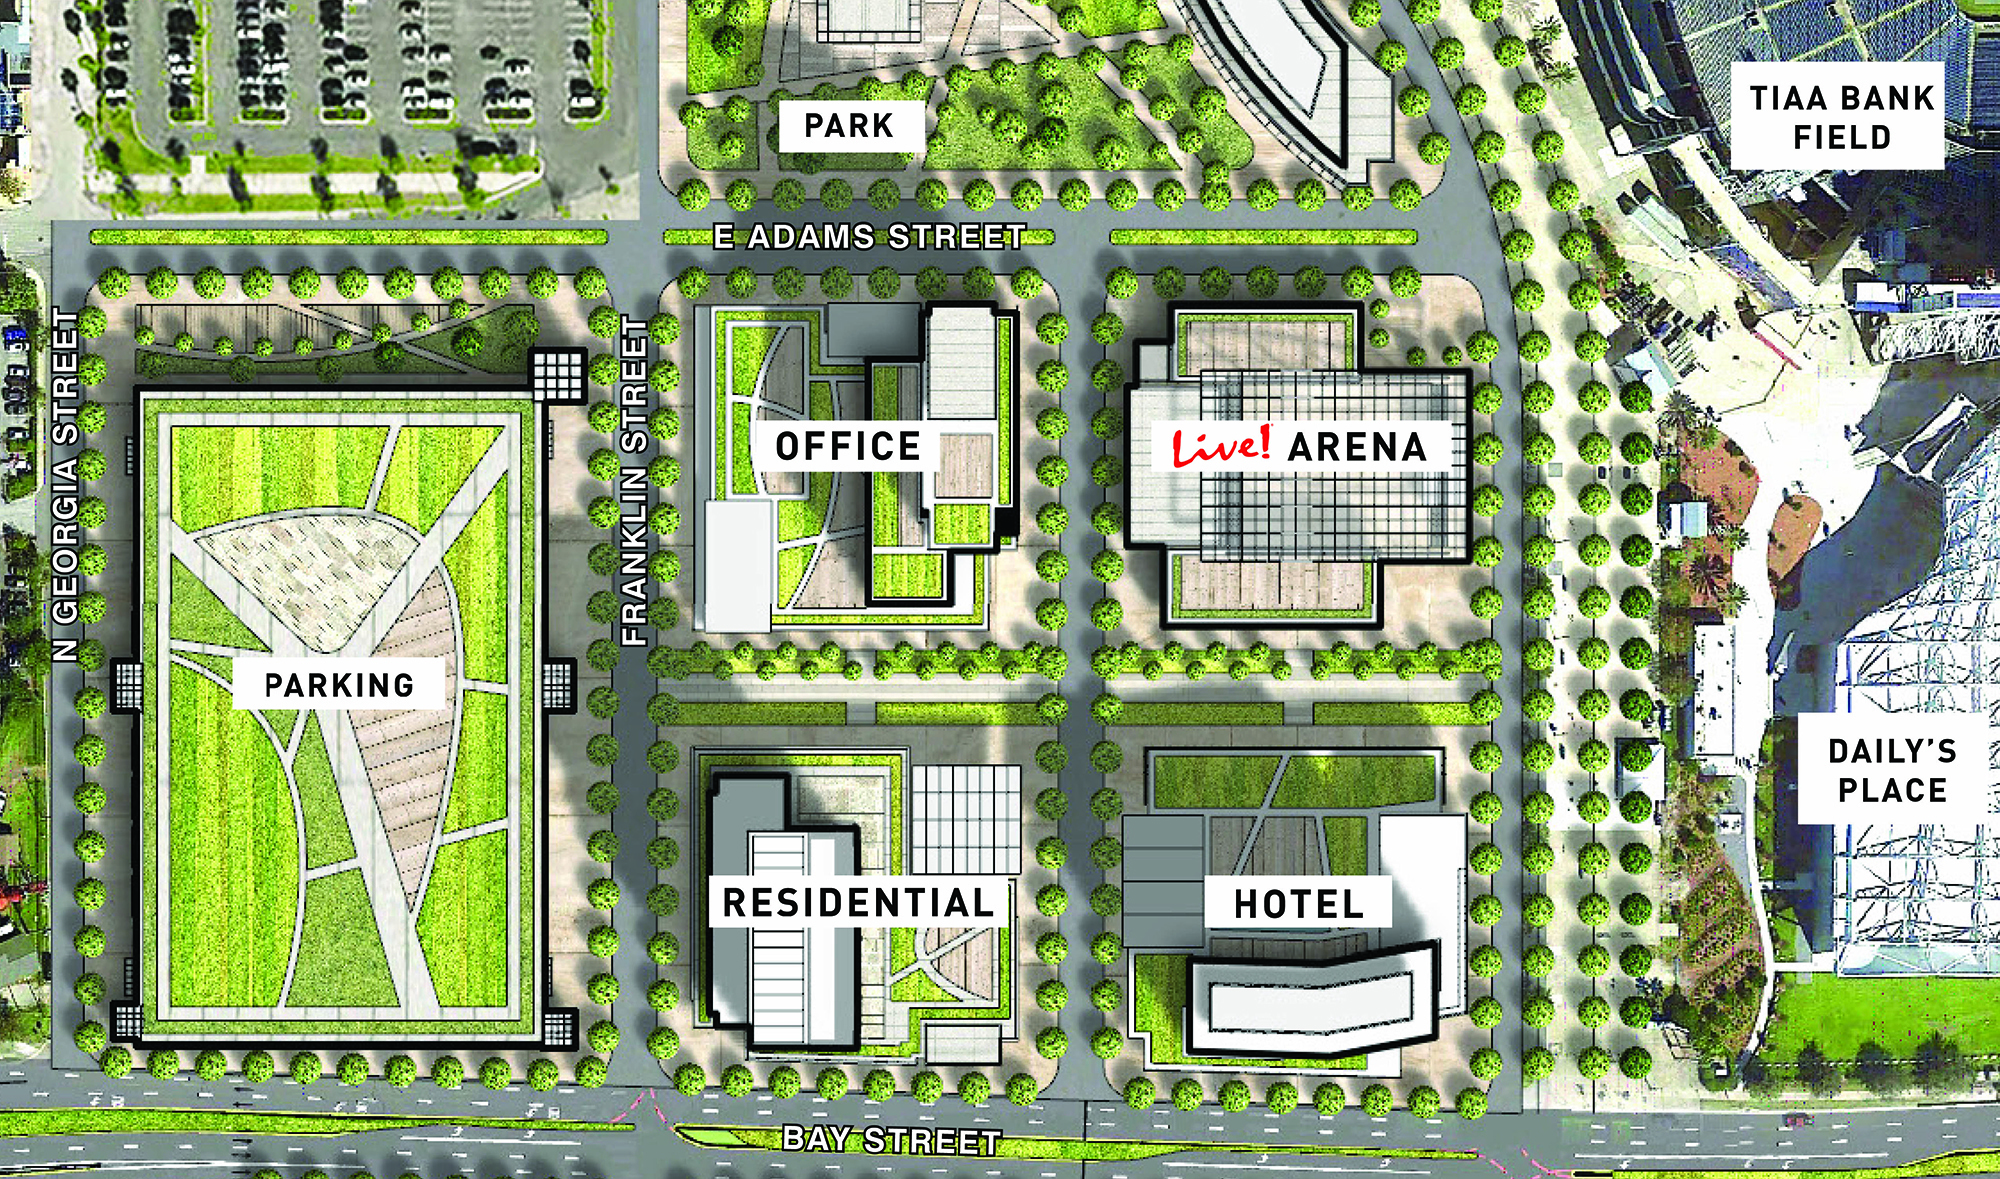 A map of the Lot J development released by the Jacksonville Jaguars in April.